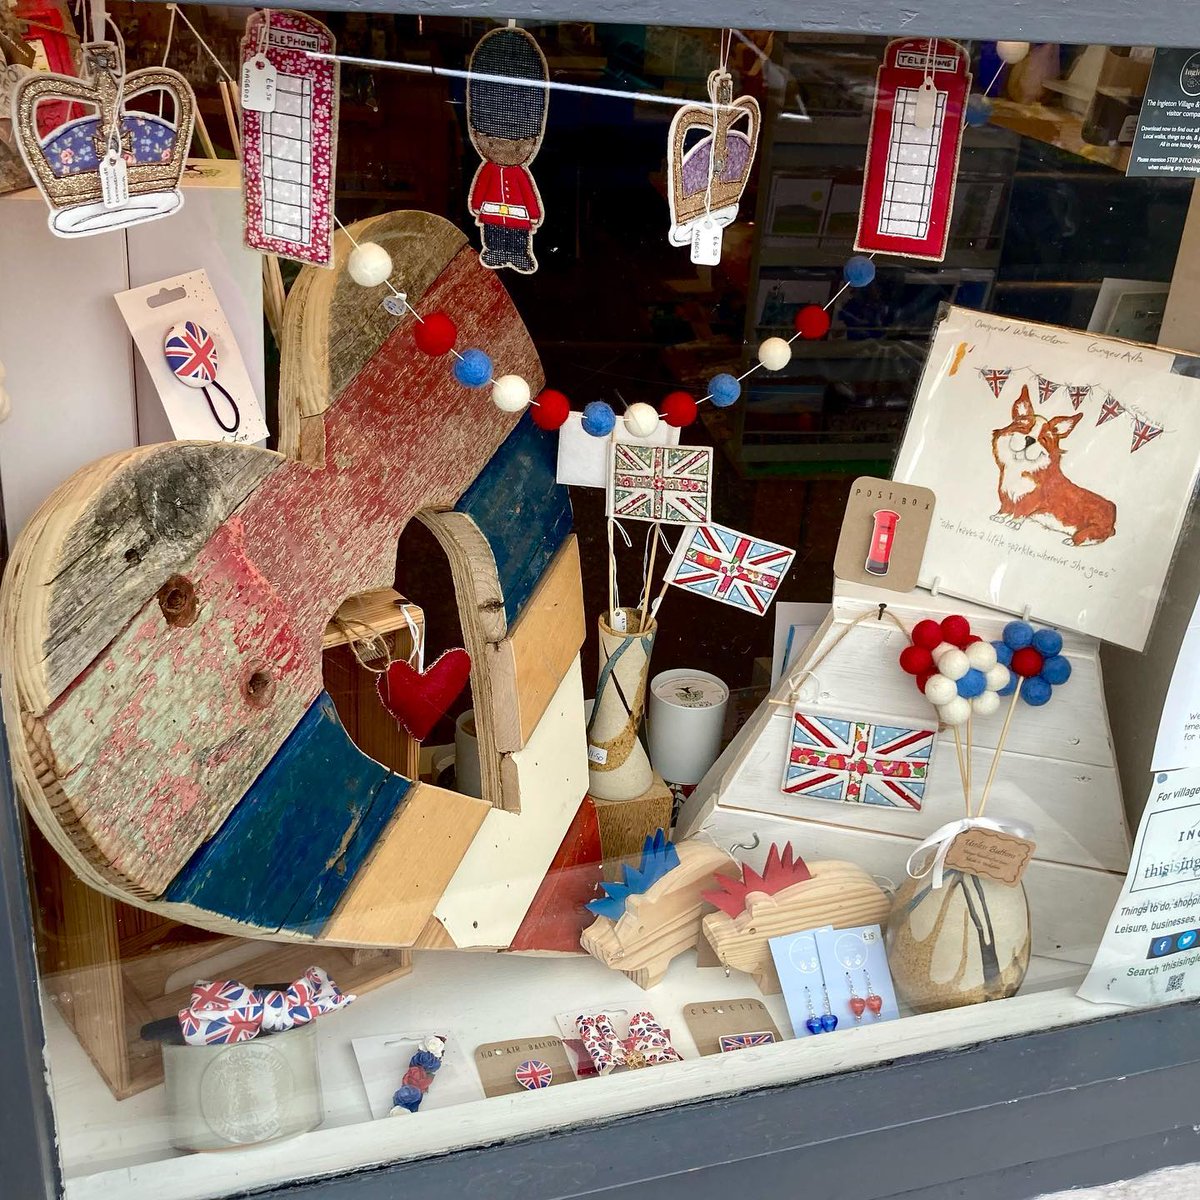 Coronation window done! So many gorgeous handmade souvenirs, decorations and mementos. Do you think King Charles would approve?
#coronation #coronationwindow #coronationsouvenir #kingcharles #makeitbritish #madeinyorkshire #yorkshiremakers #shopindie #Ingleton